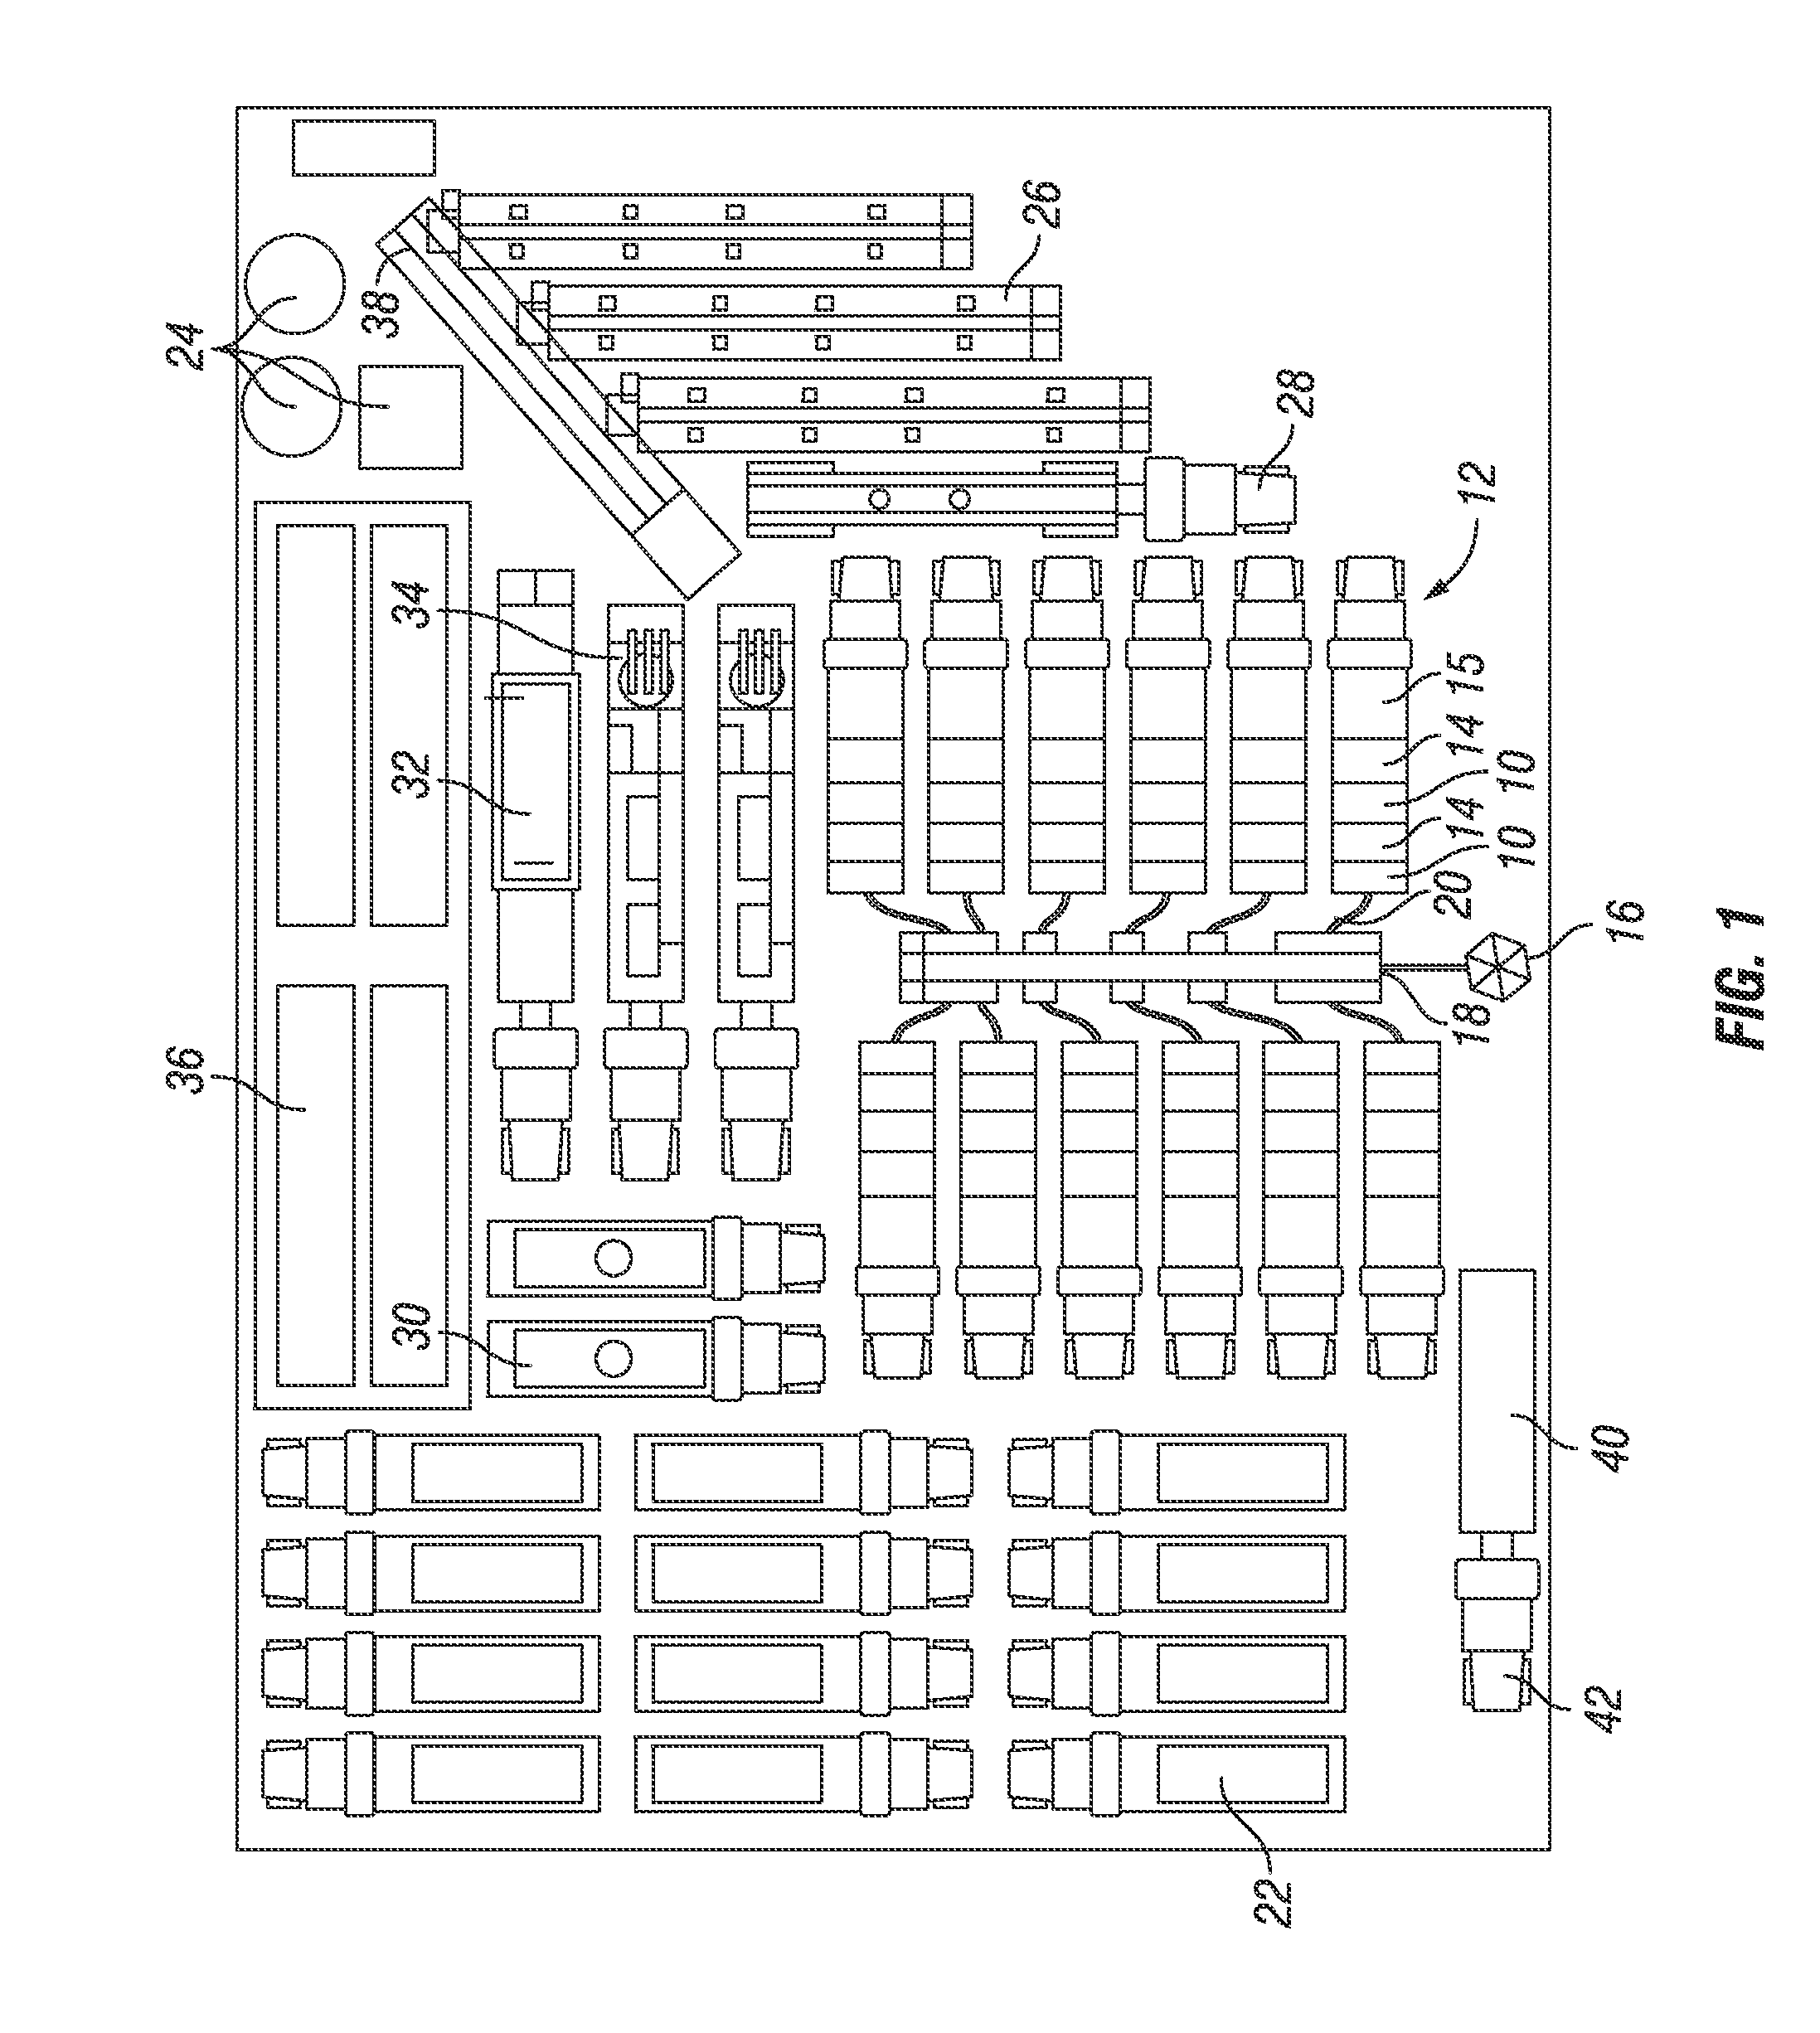 System and method for parallel power and blackout protection for electric powered hydraulic fracturing